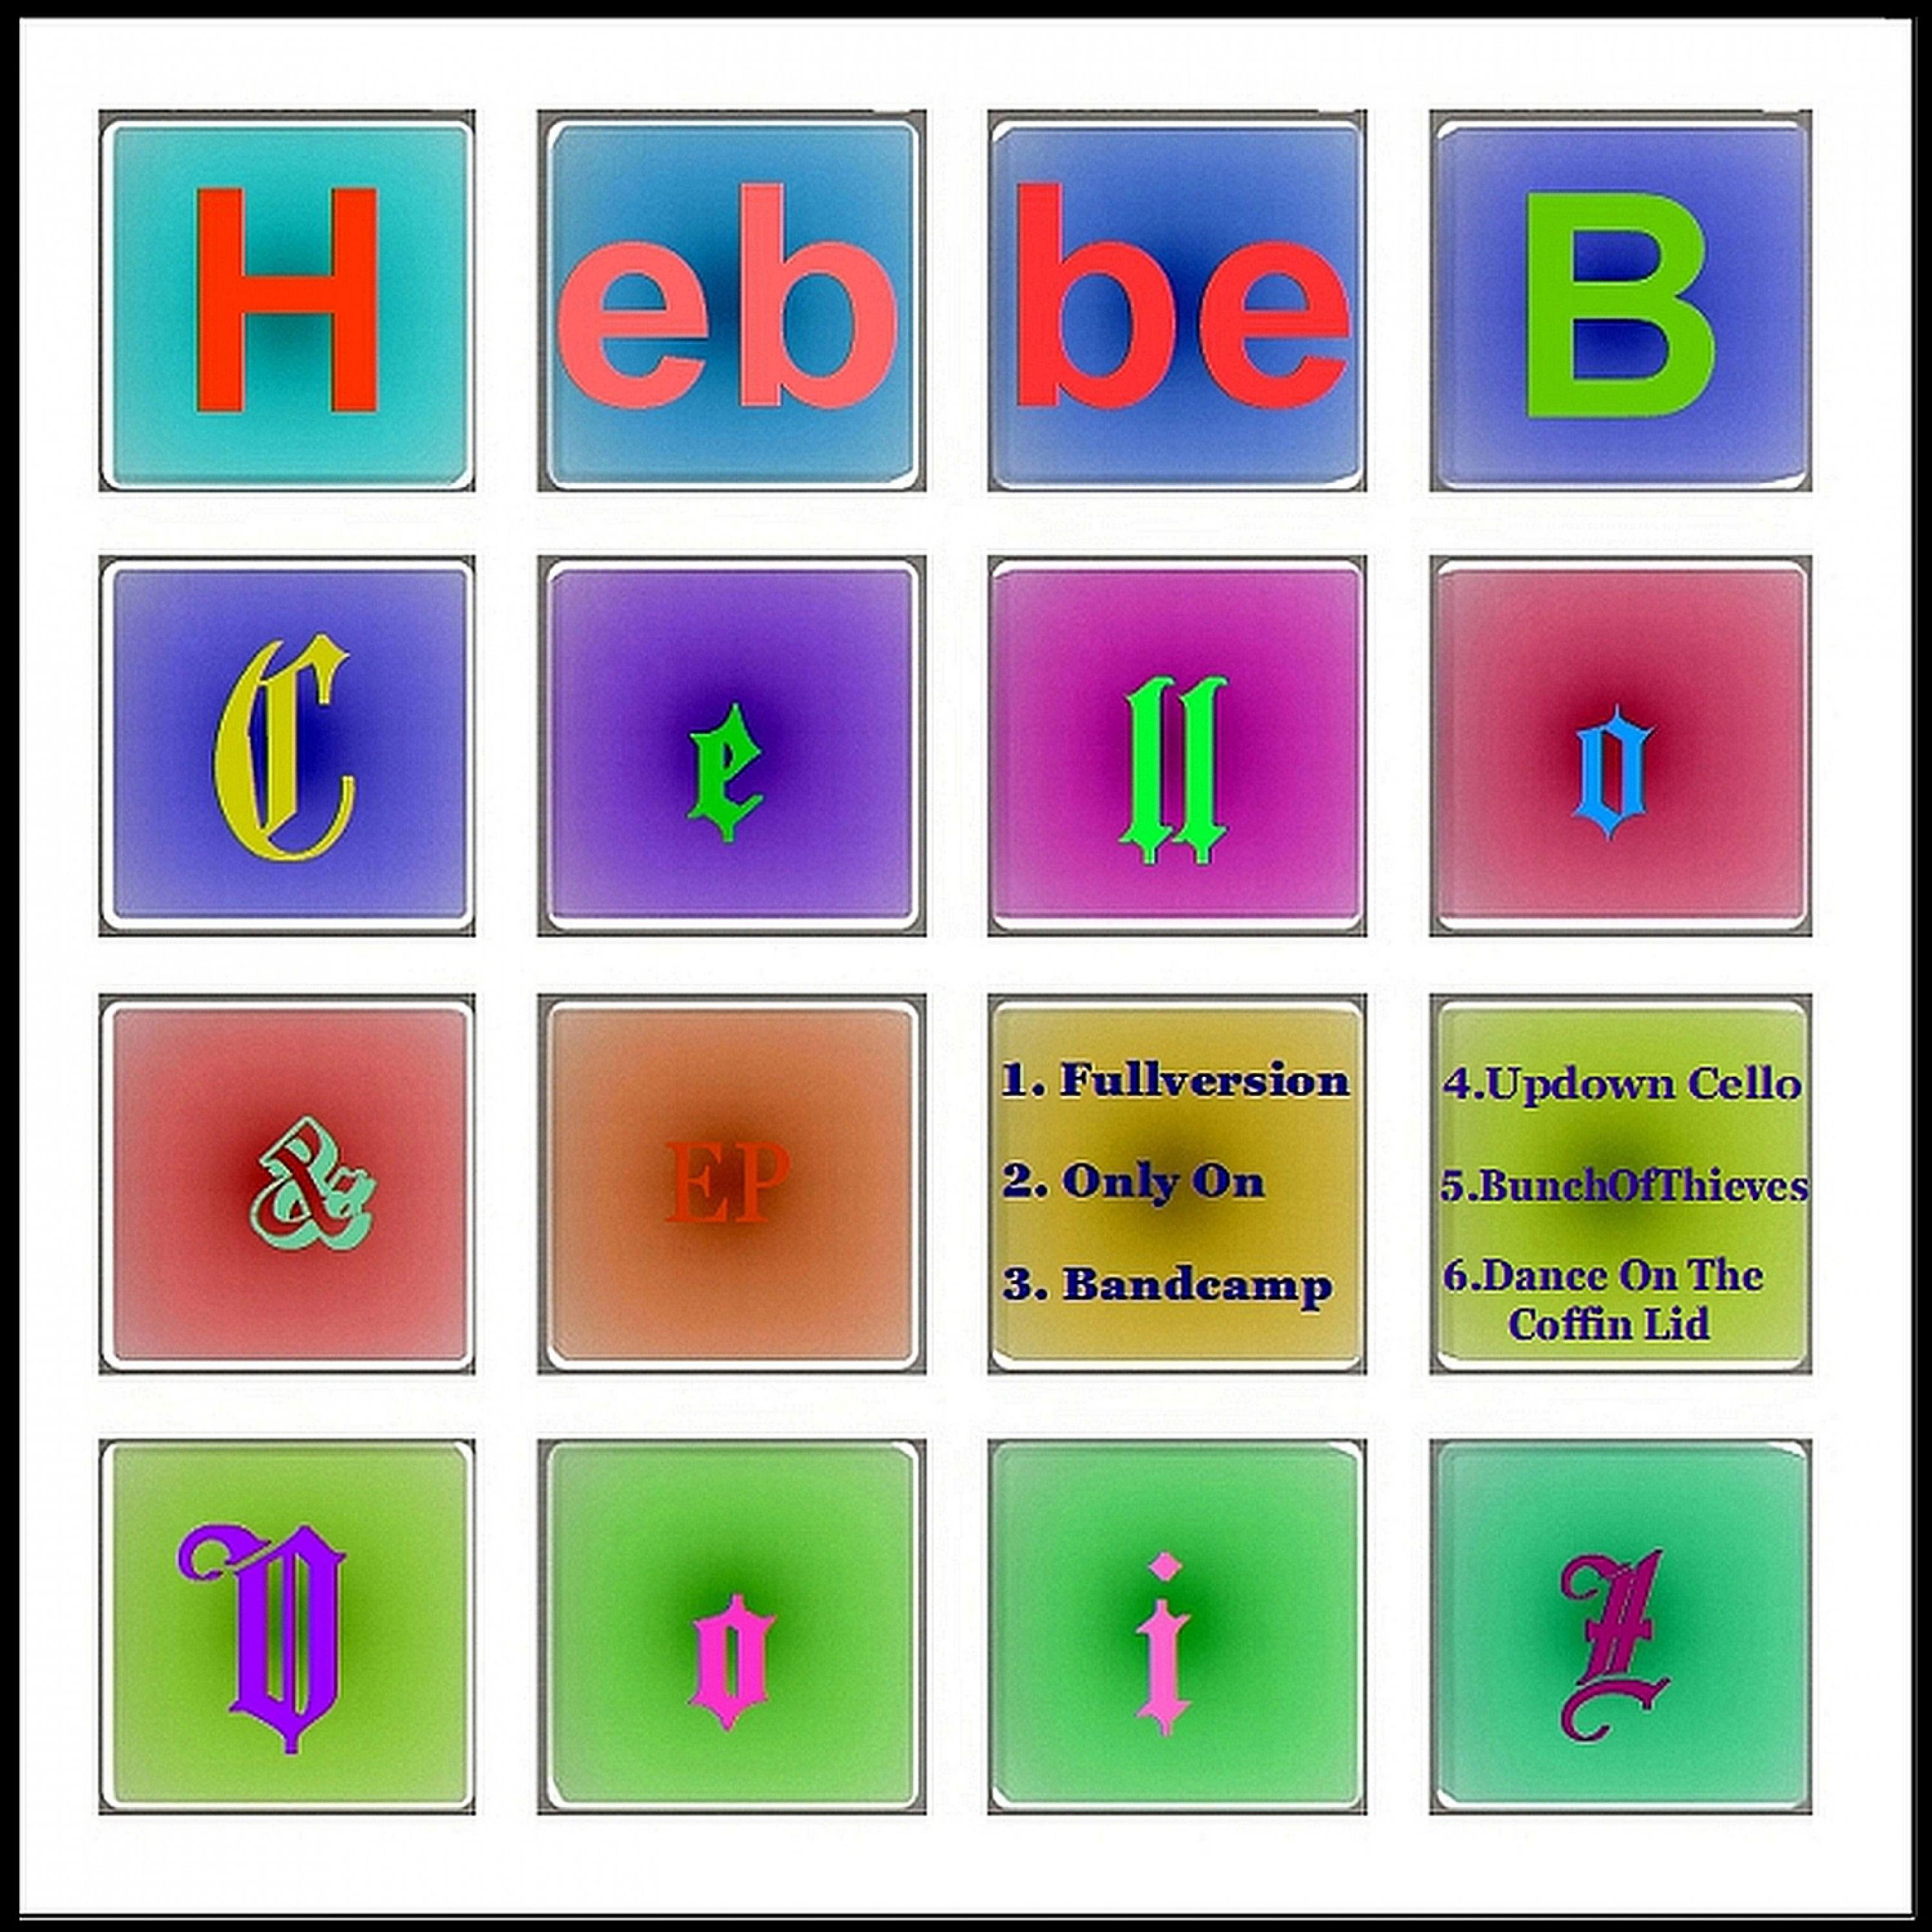 Hebbe B - Bunch Of Thieves